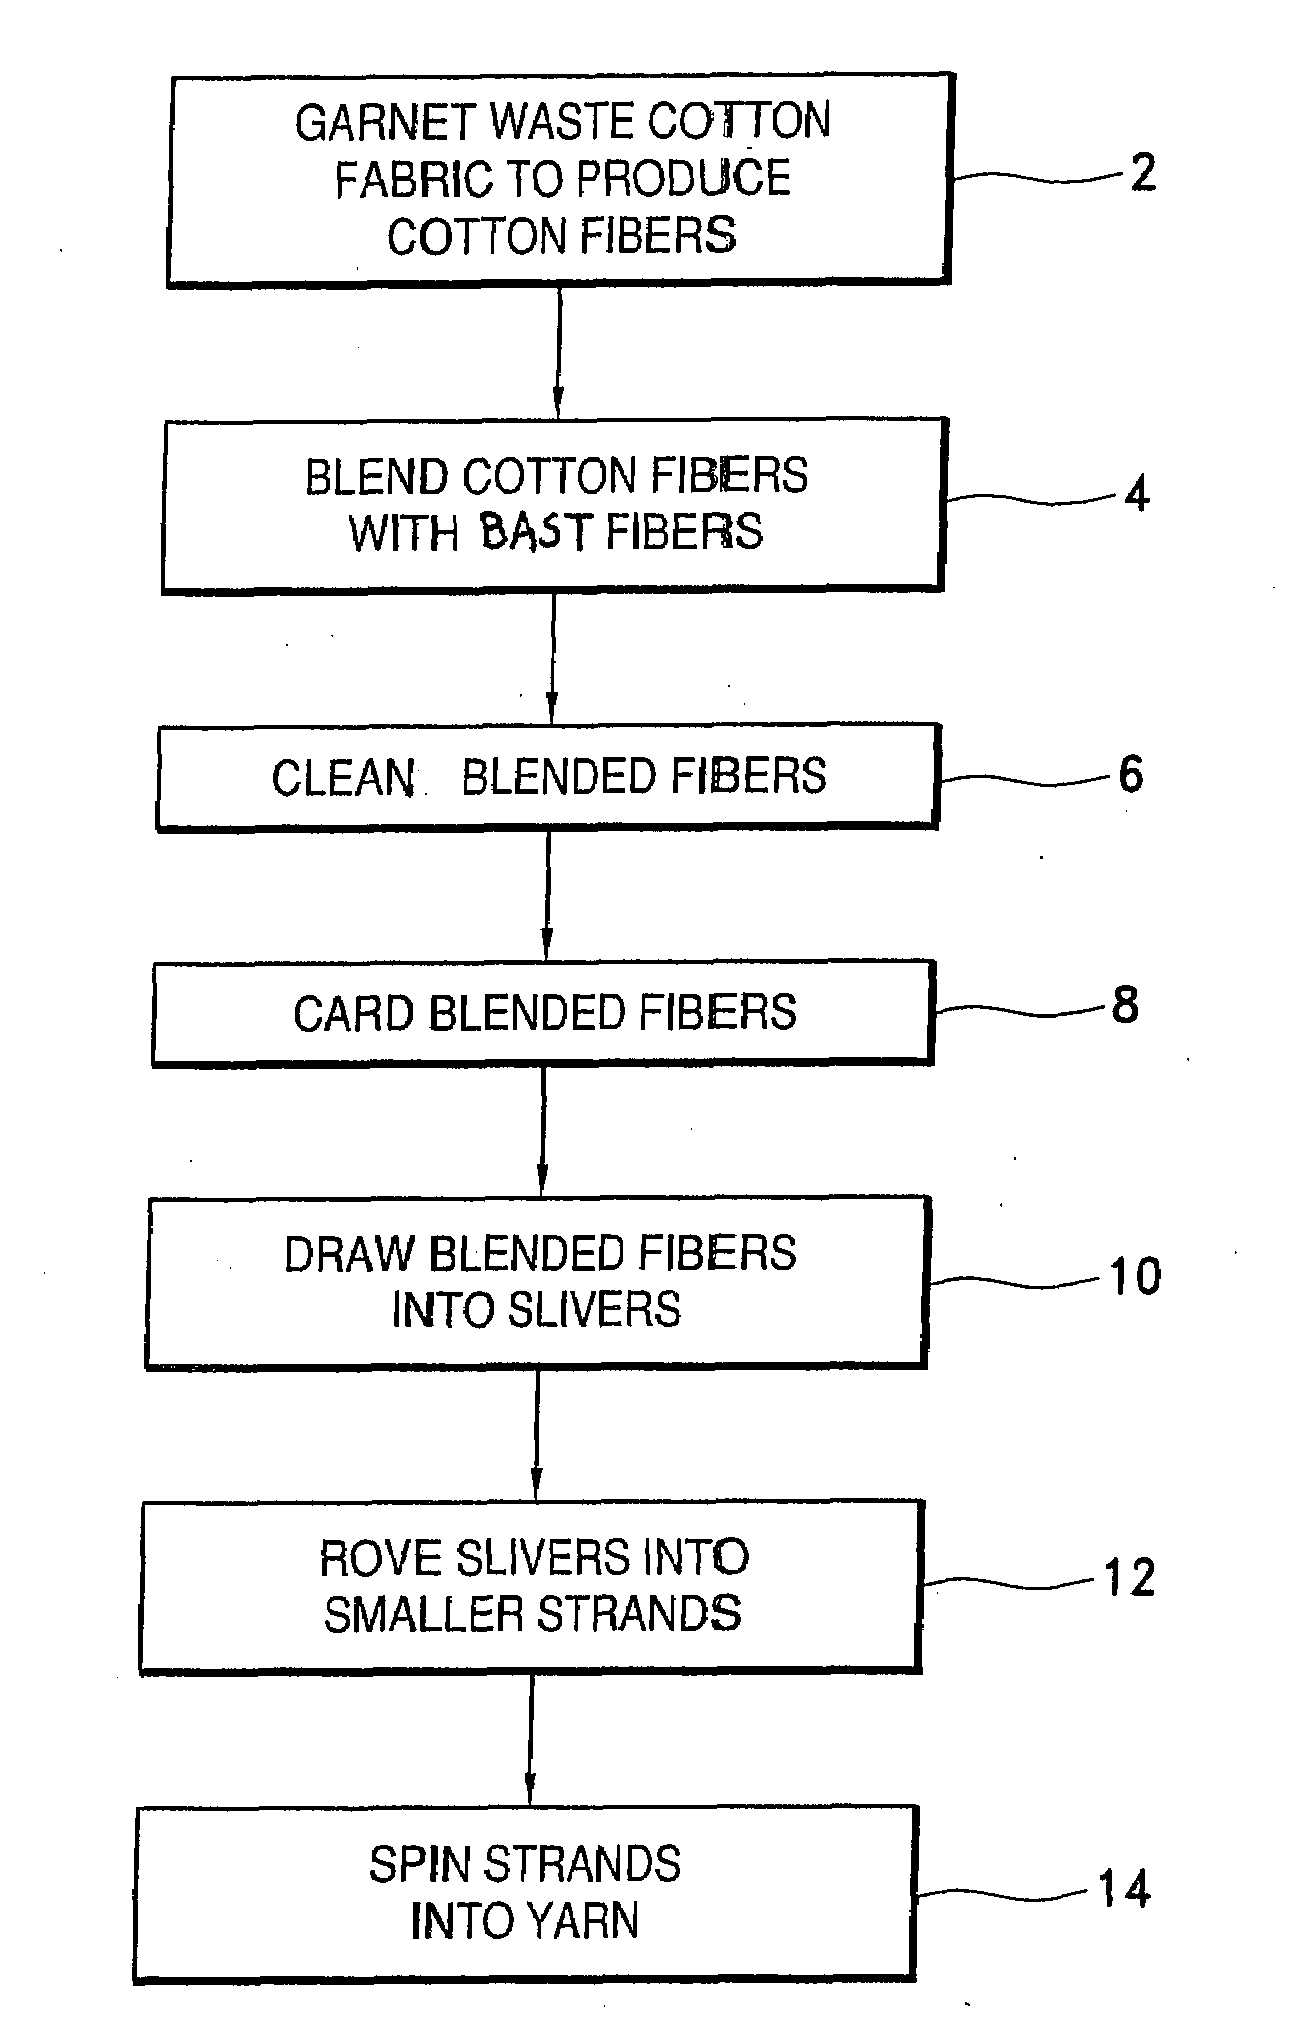 Composite regenerated cotton and bast fiber yarn and method for making the same